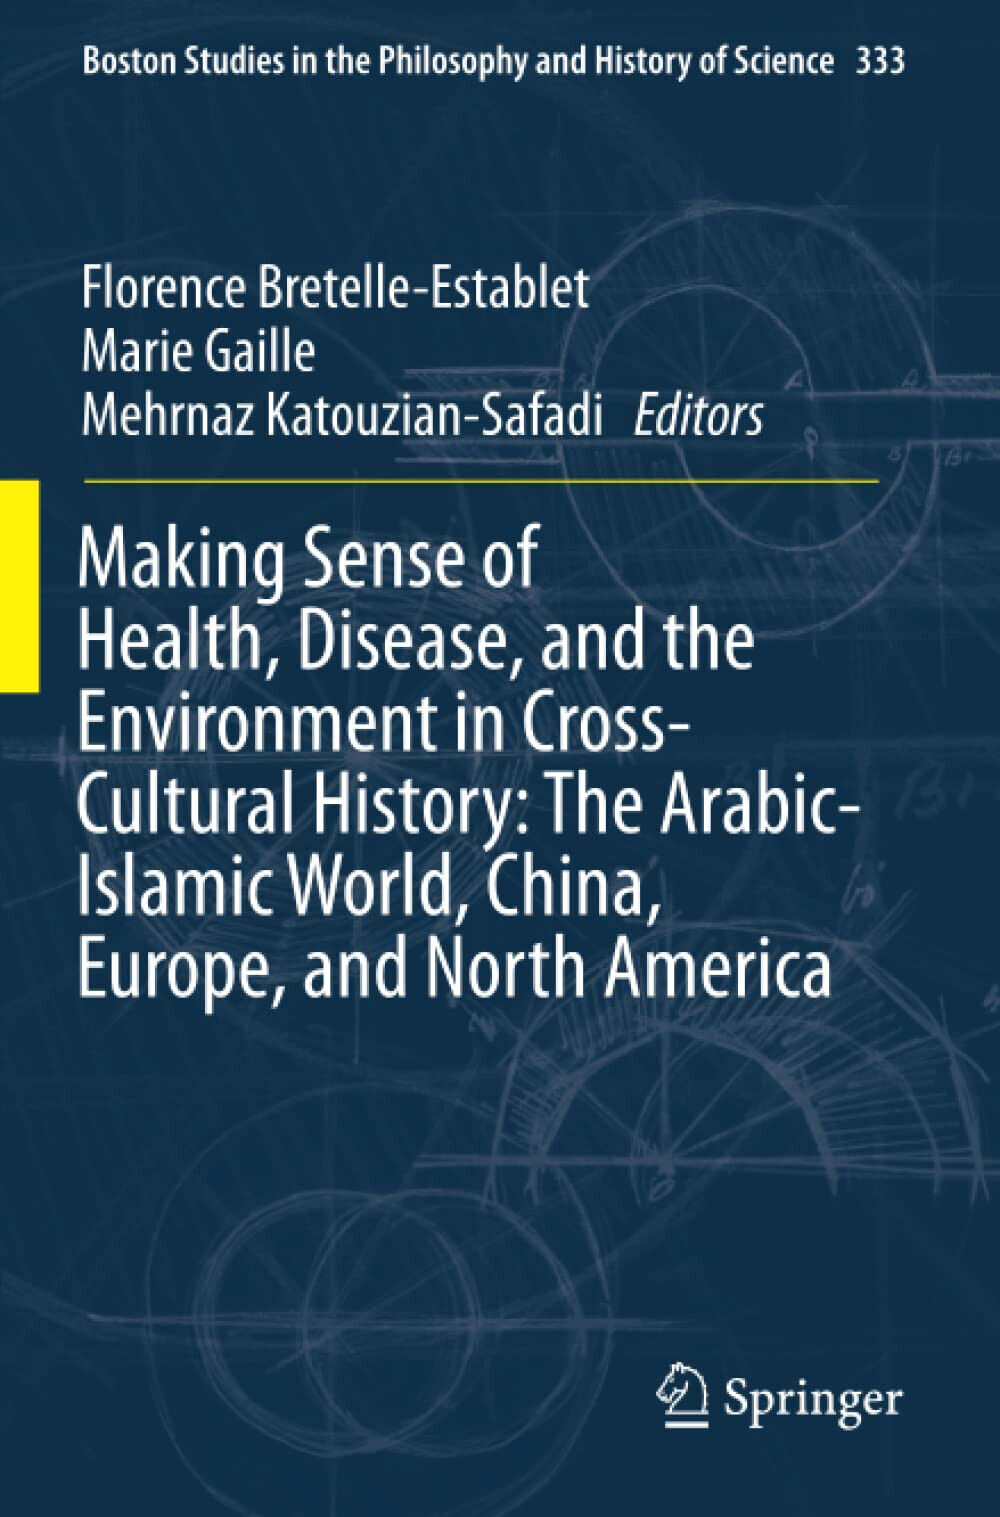 Making Sense of Health, Disease, and the Environment in Cross-Cultural History